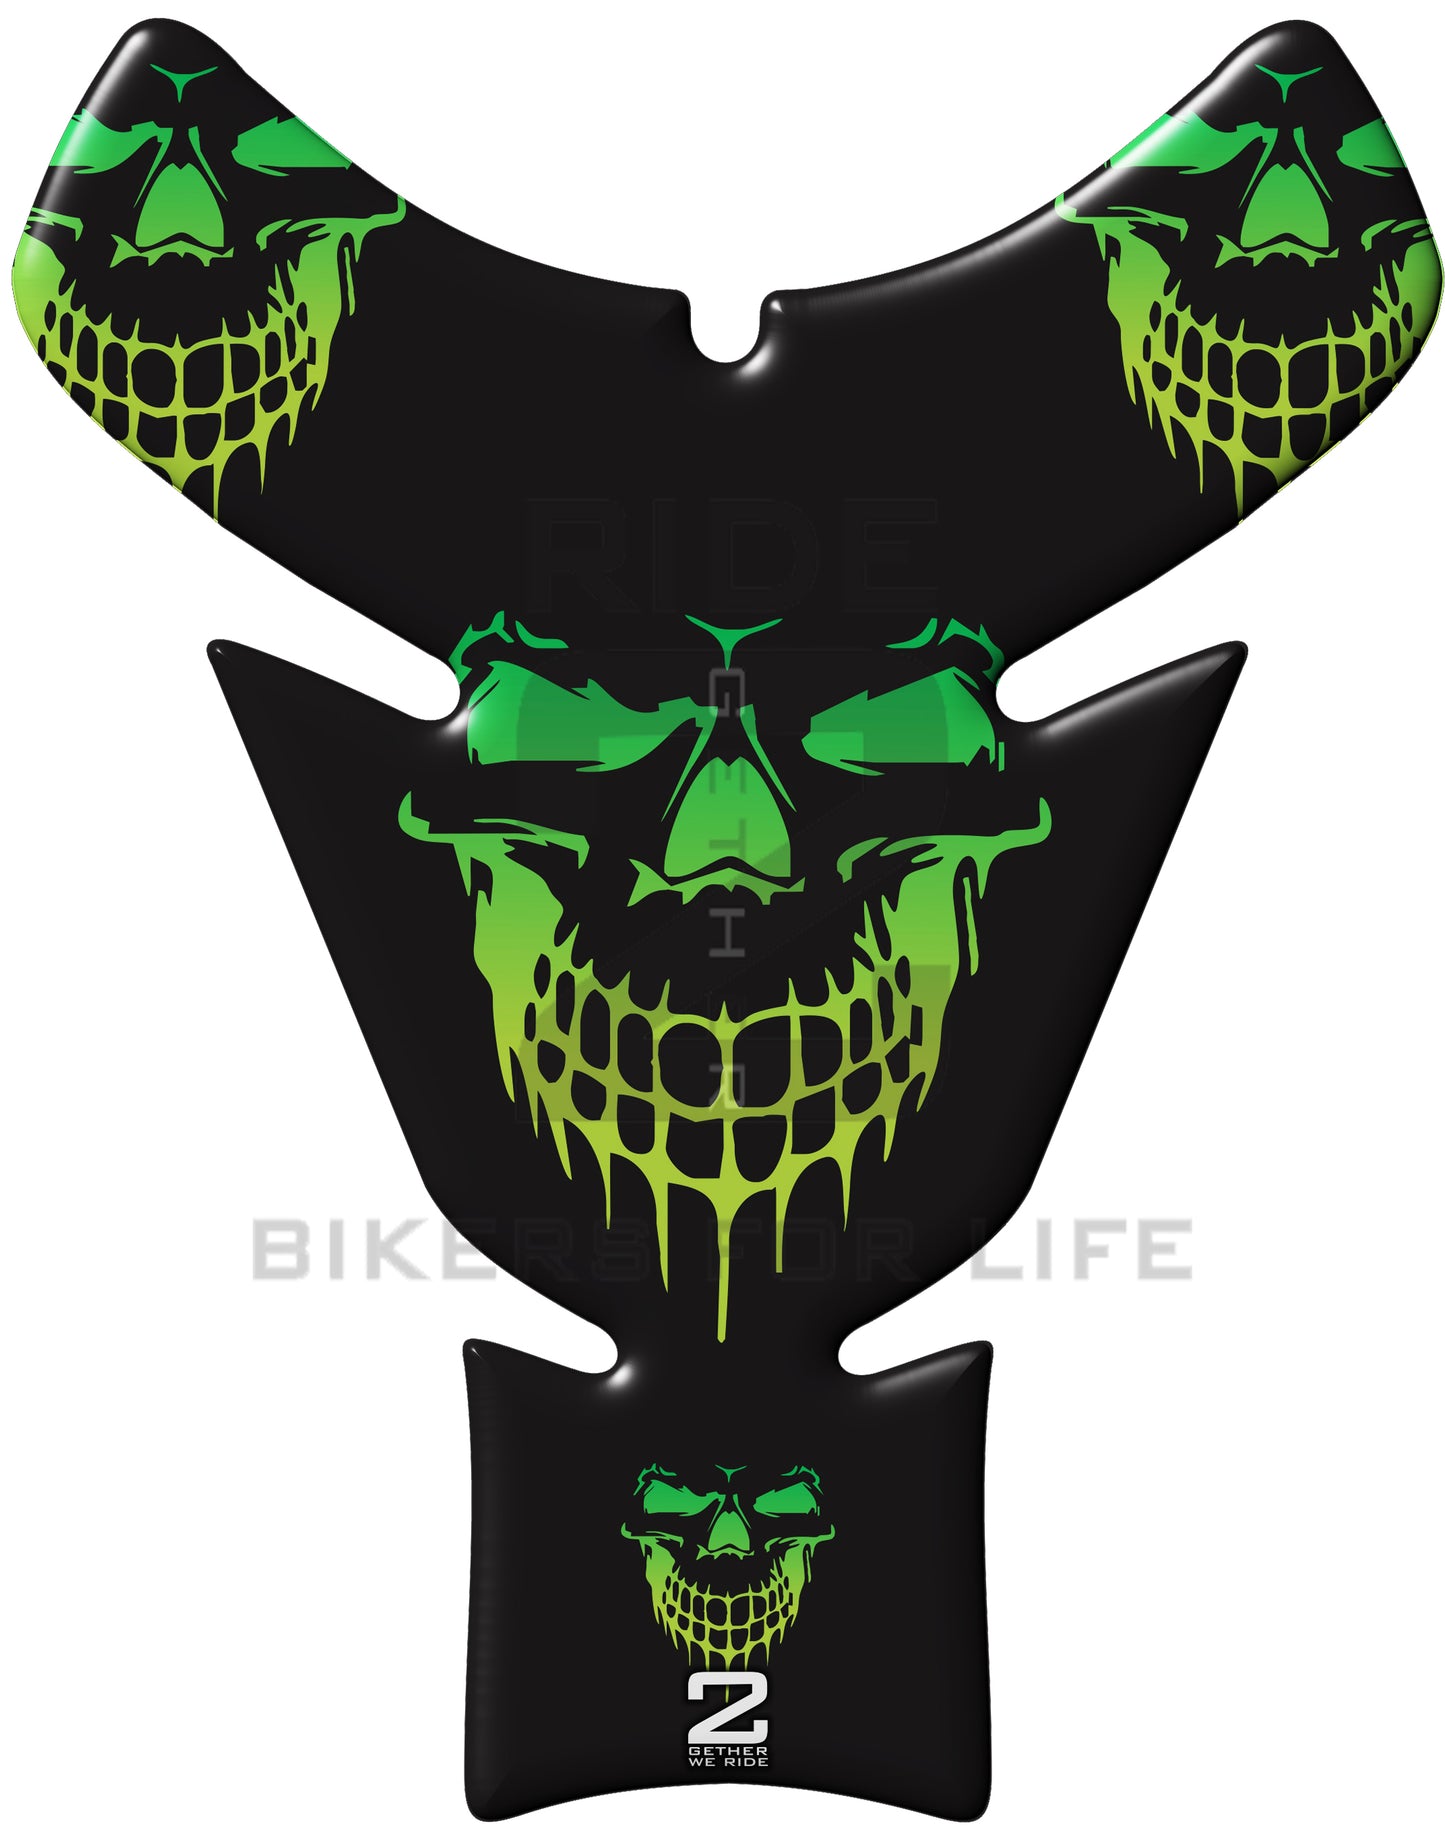 Universal Fit Black and Neon Green Smiling Reaper Motor Bike Tank Pad Protector. A Street Pad which fits most motorcycles.